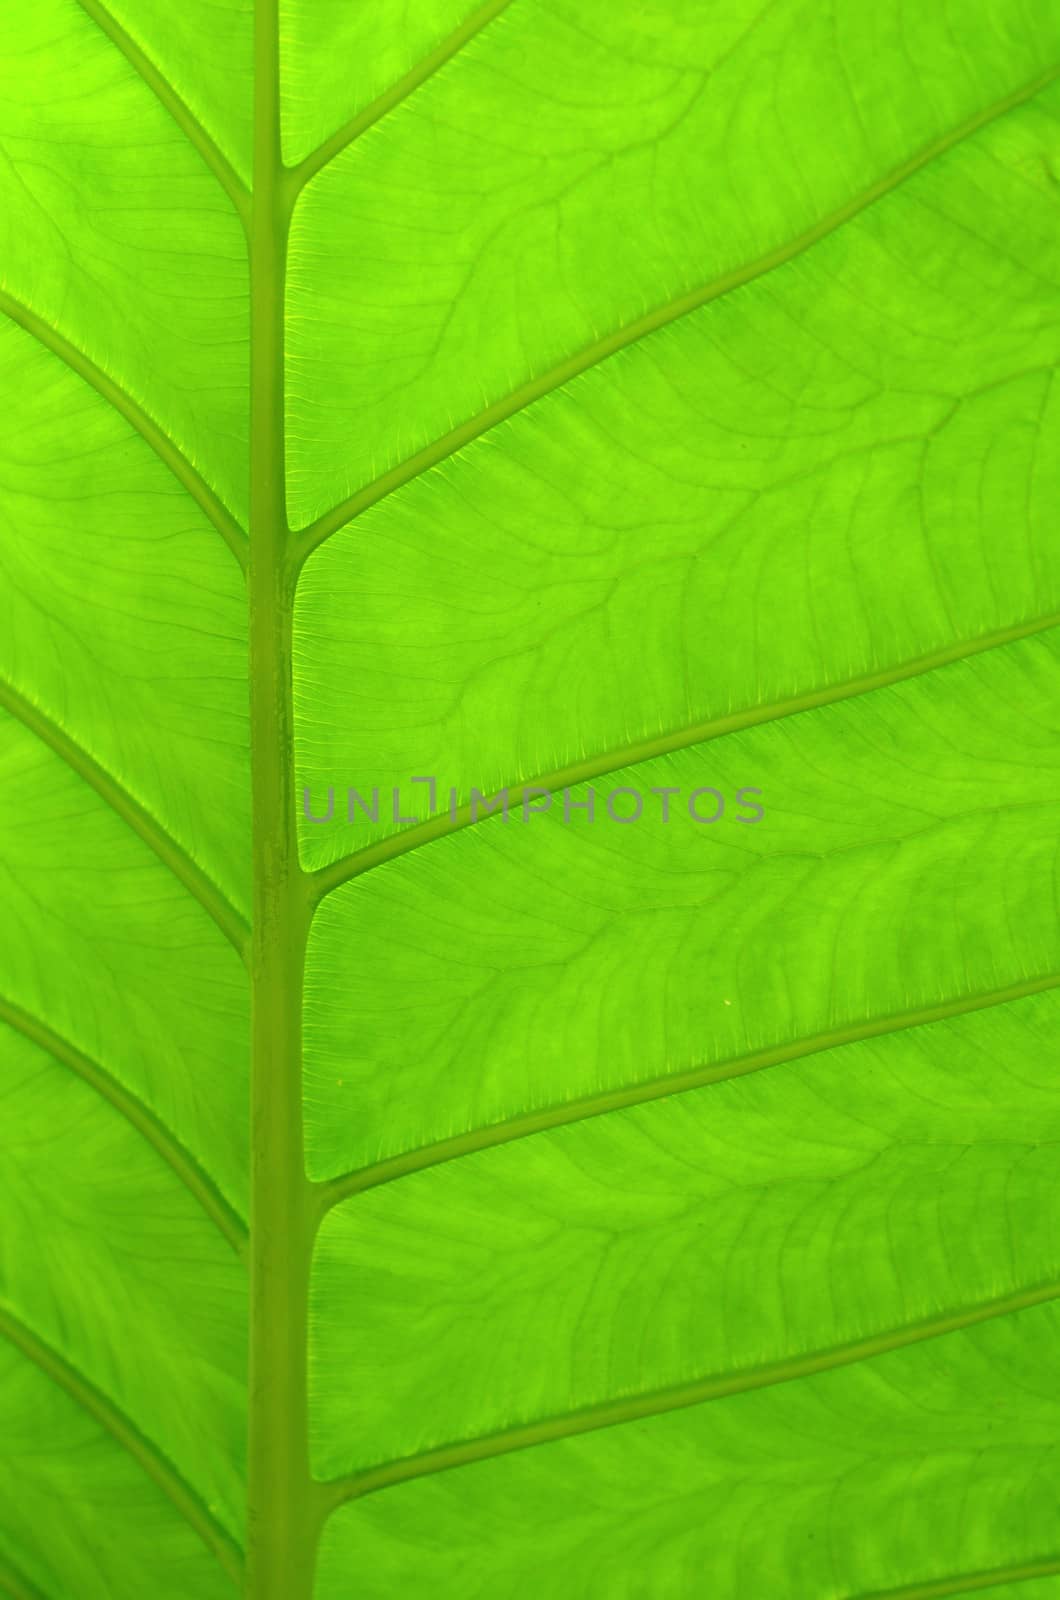 Abstract Background Texture Of A Beautiful Green Tropical Leaf